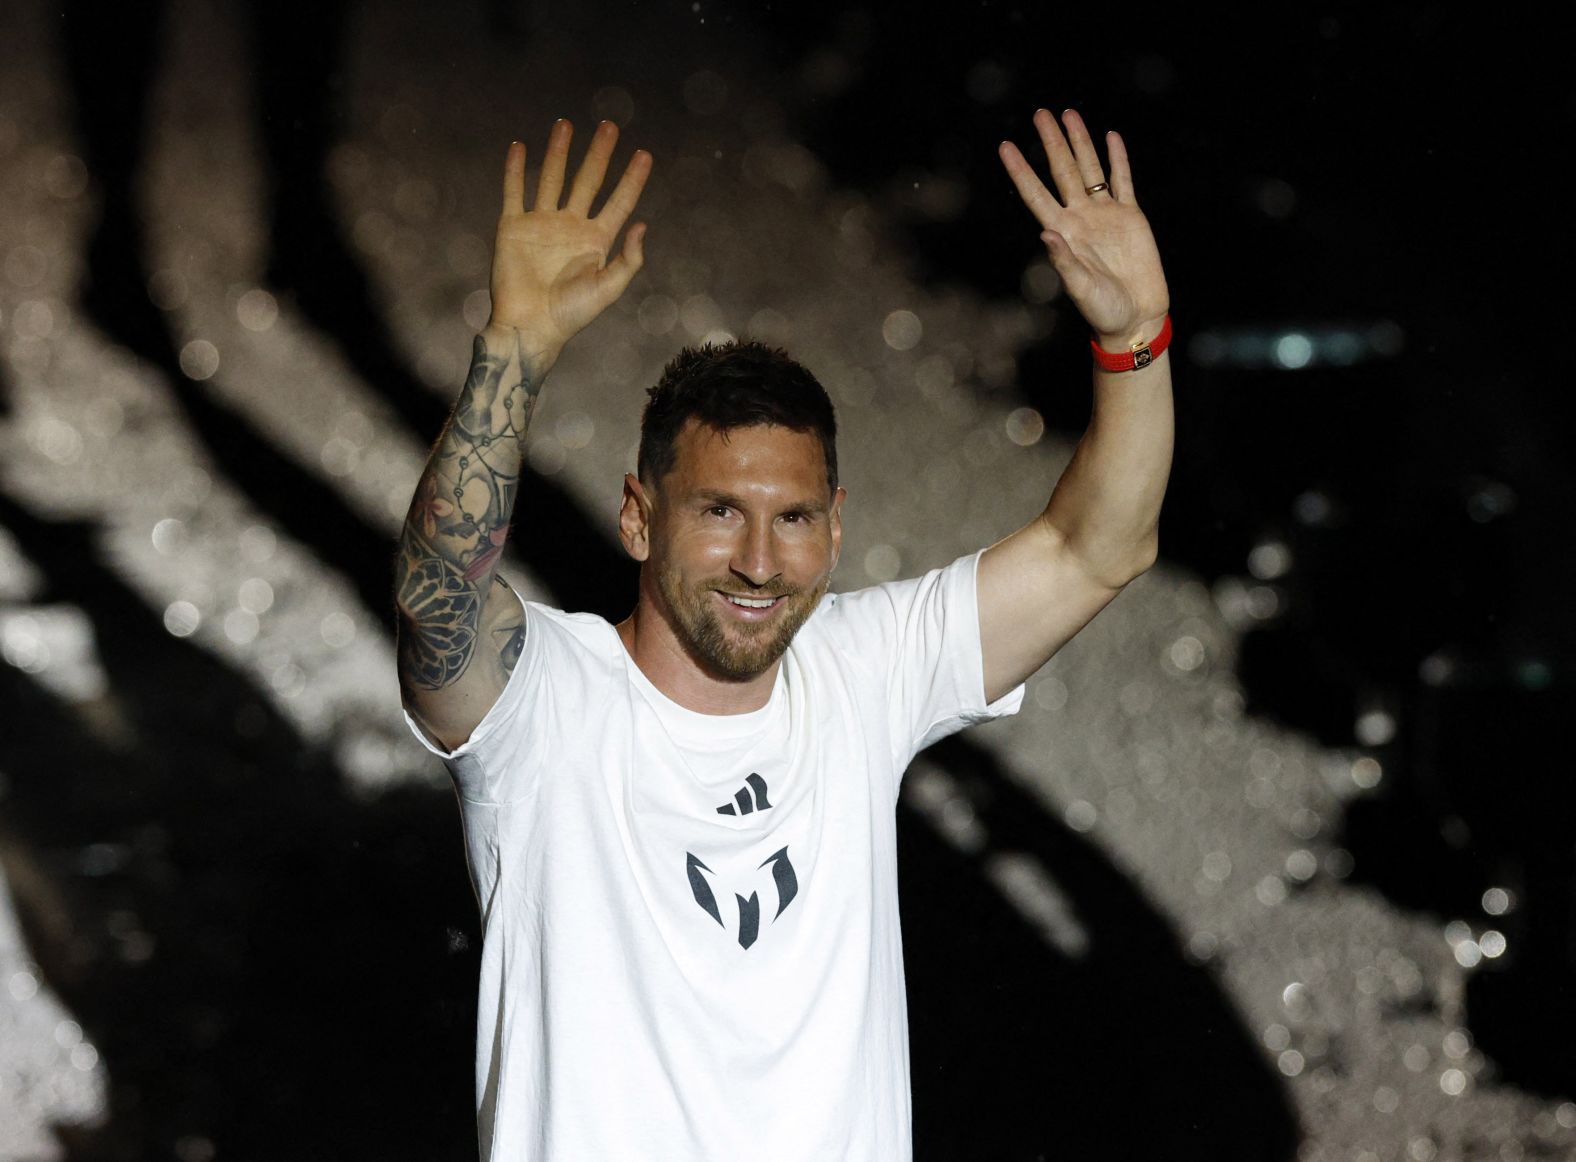 Messi waves to Inter Miami fans during his <a href="index.php?page=&url=https%3A%2F%2Fwww.cnn.com%2F2023%2F07%2F17%2Fsport%2Flionel-messi-inter-miami-unveil-spt-intl%2Findex.html" target="_blank">unveiling ceremony</a> in July 2023. He signed a contract with the club until the end of the 2025 MLS season. According to multiple reports, Messi's new deal includes an option for part-ownership of the club and a cut of revenue from new subscribers to Apple TV's MLS Season Pass streaming service.